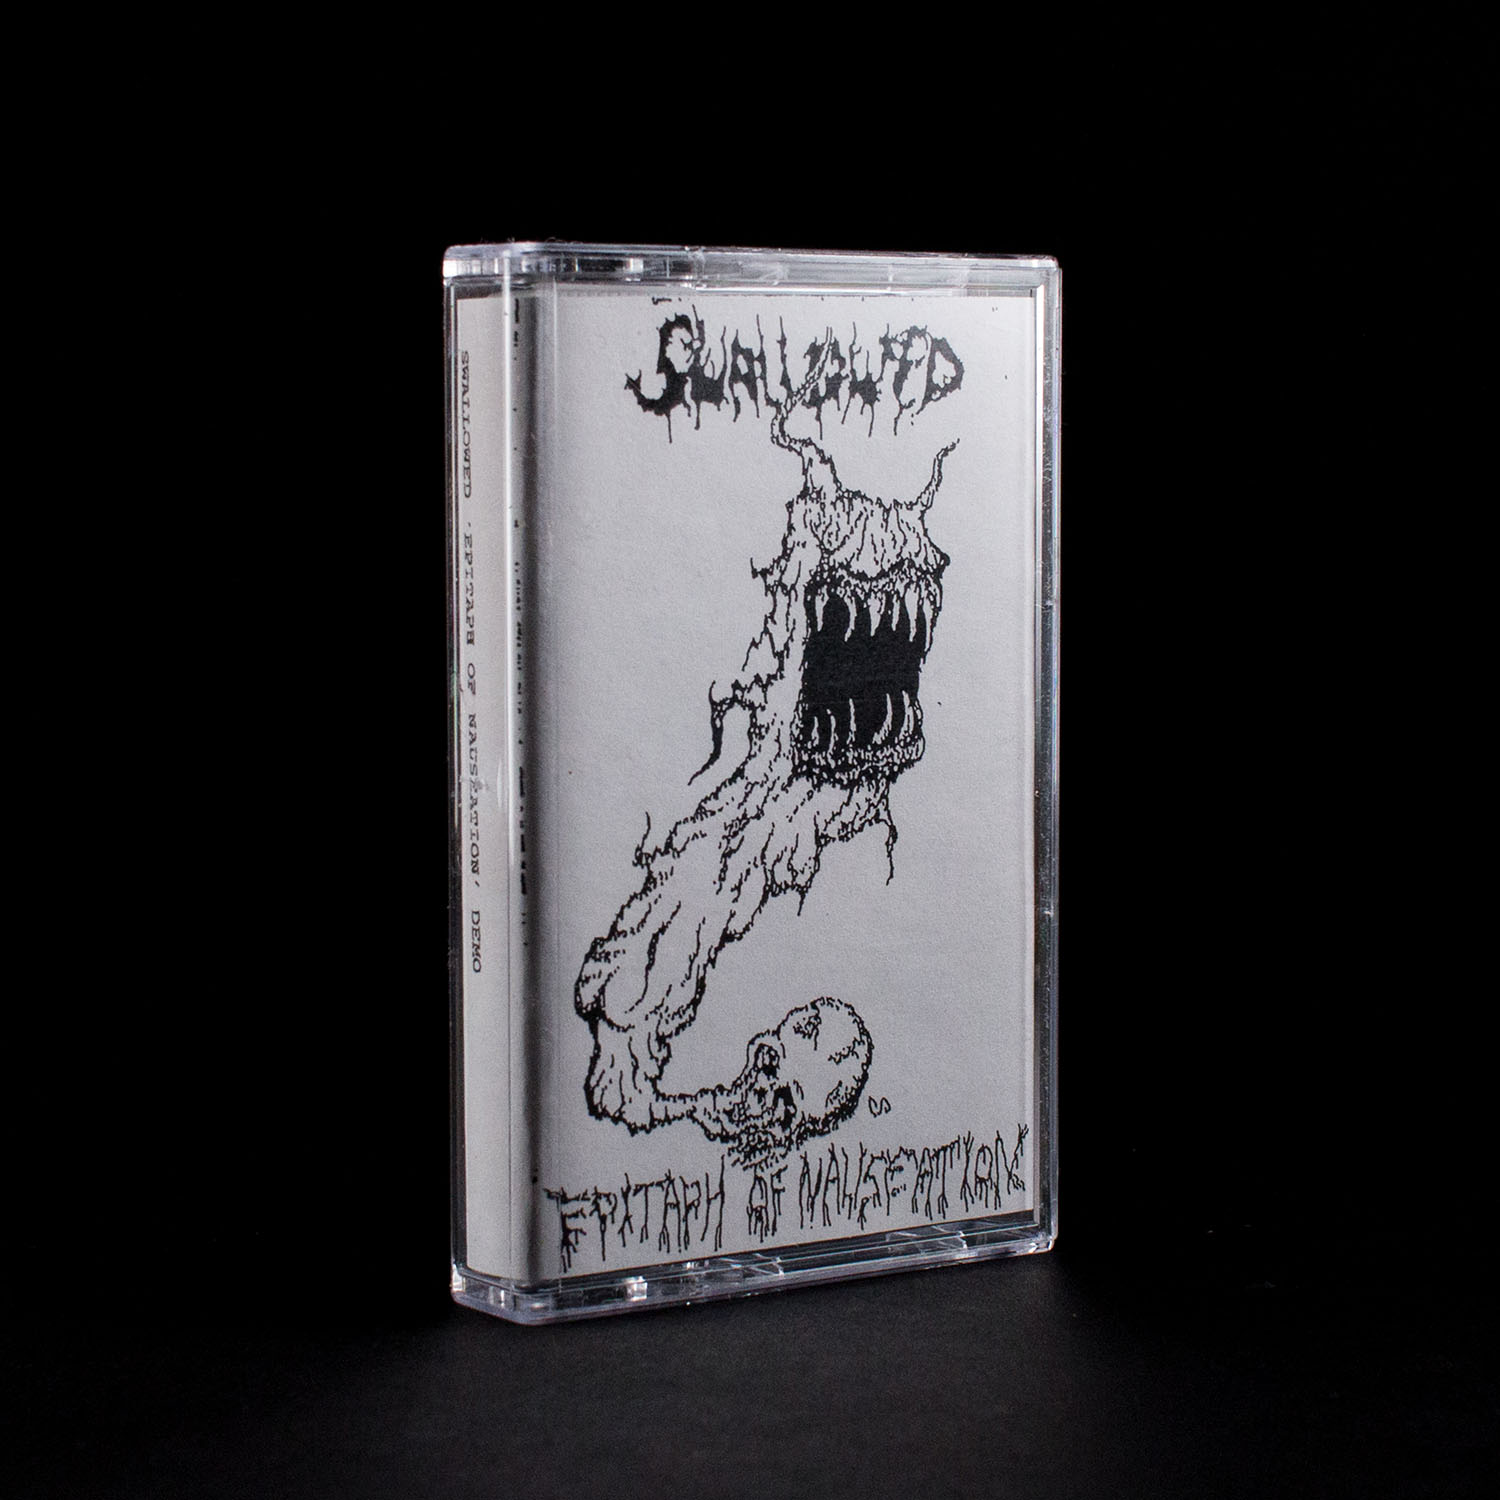 Swallowed | Epitaph Of Nauseation | Cassette